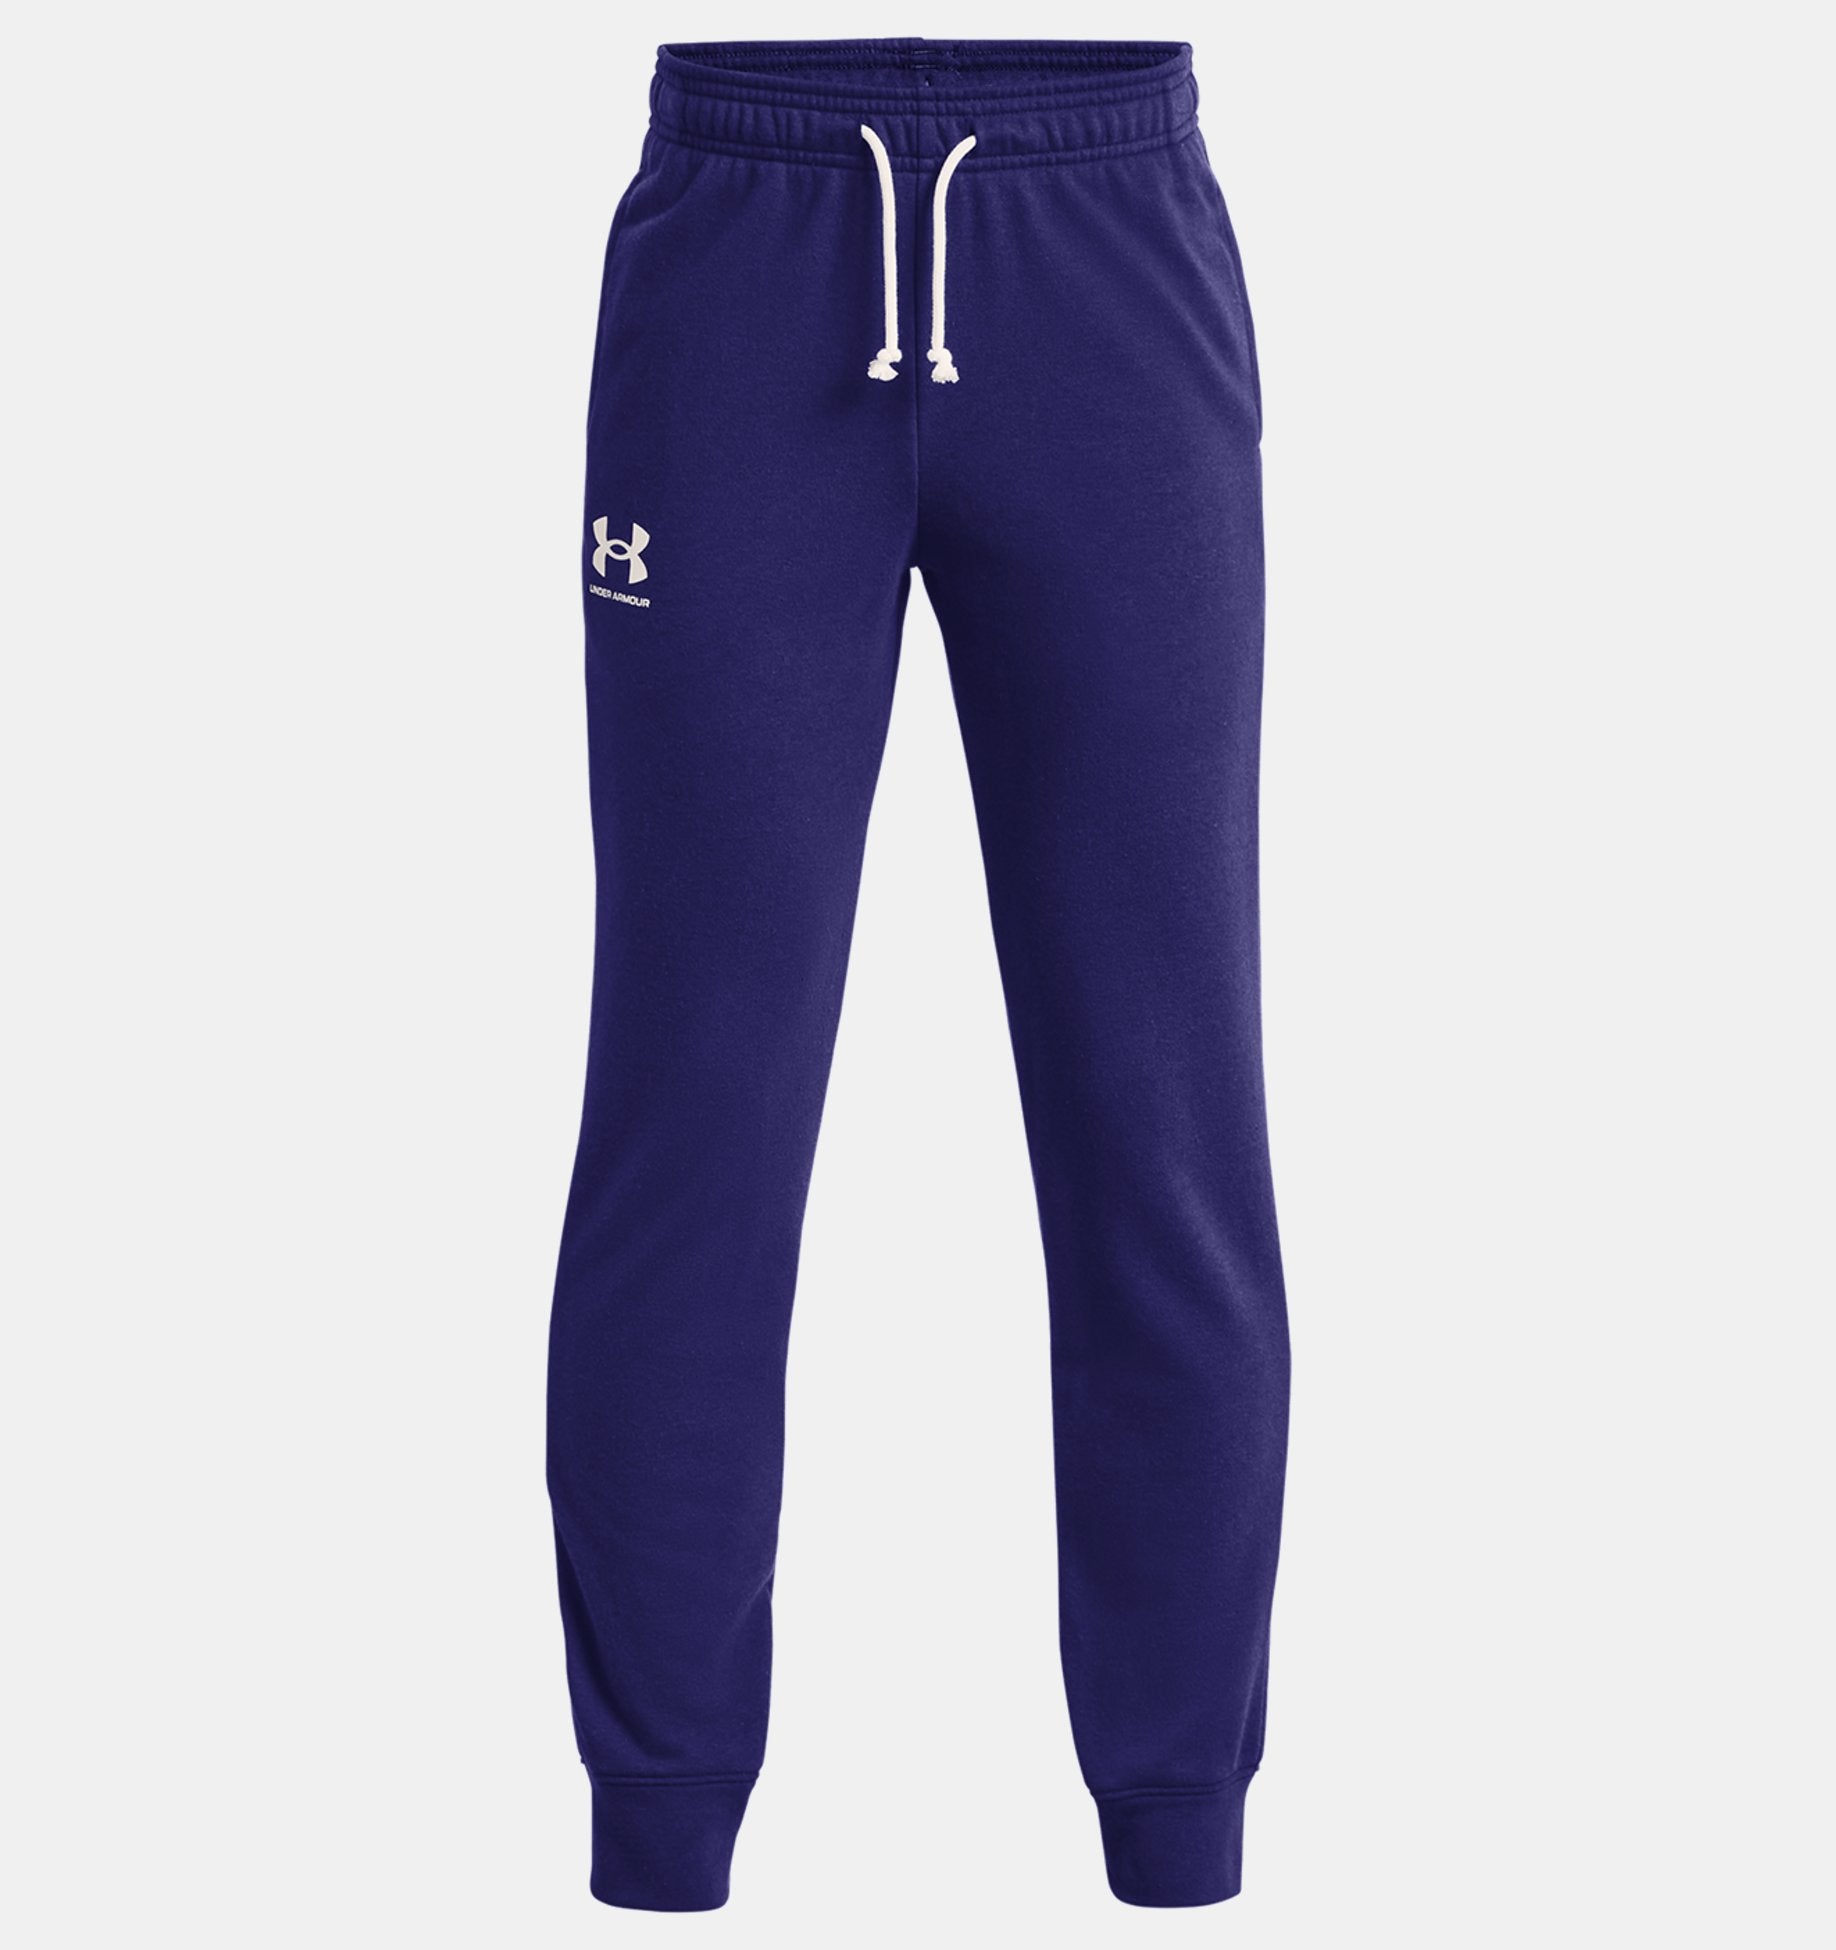 Under Armour Boys' Rival Terry Joggers Apparel Under Armour Sonar Blue/Onyx White-468 Small 